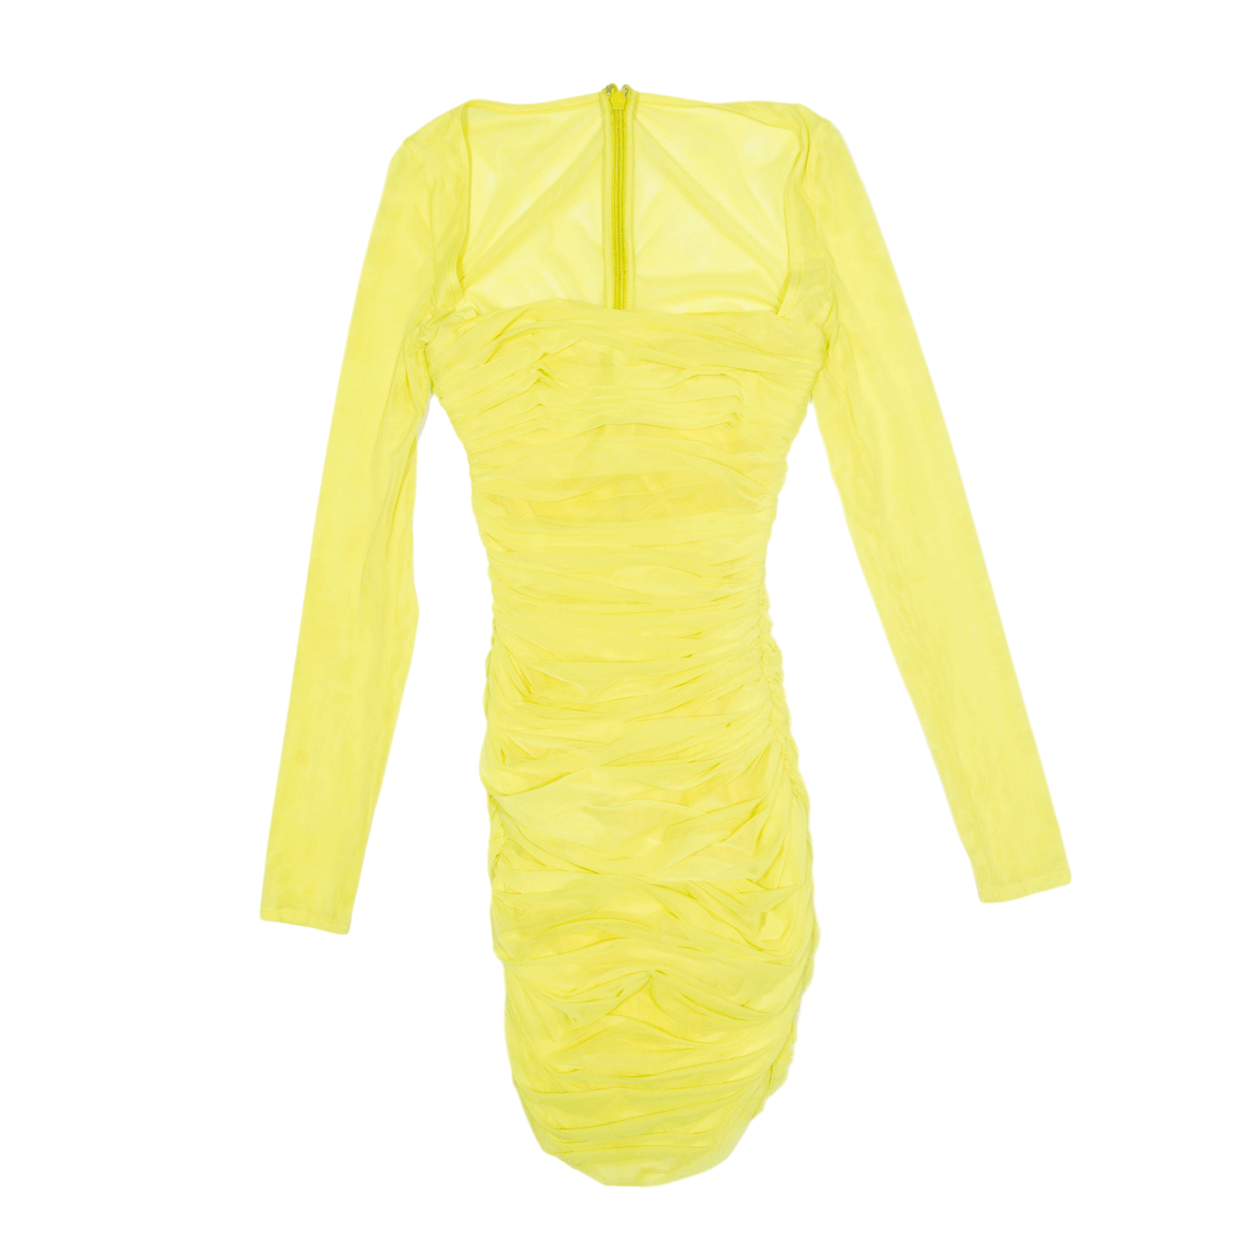 Ruched bodycon dress - Yellow - Ladies